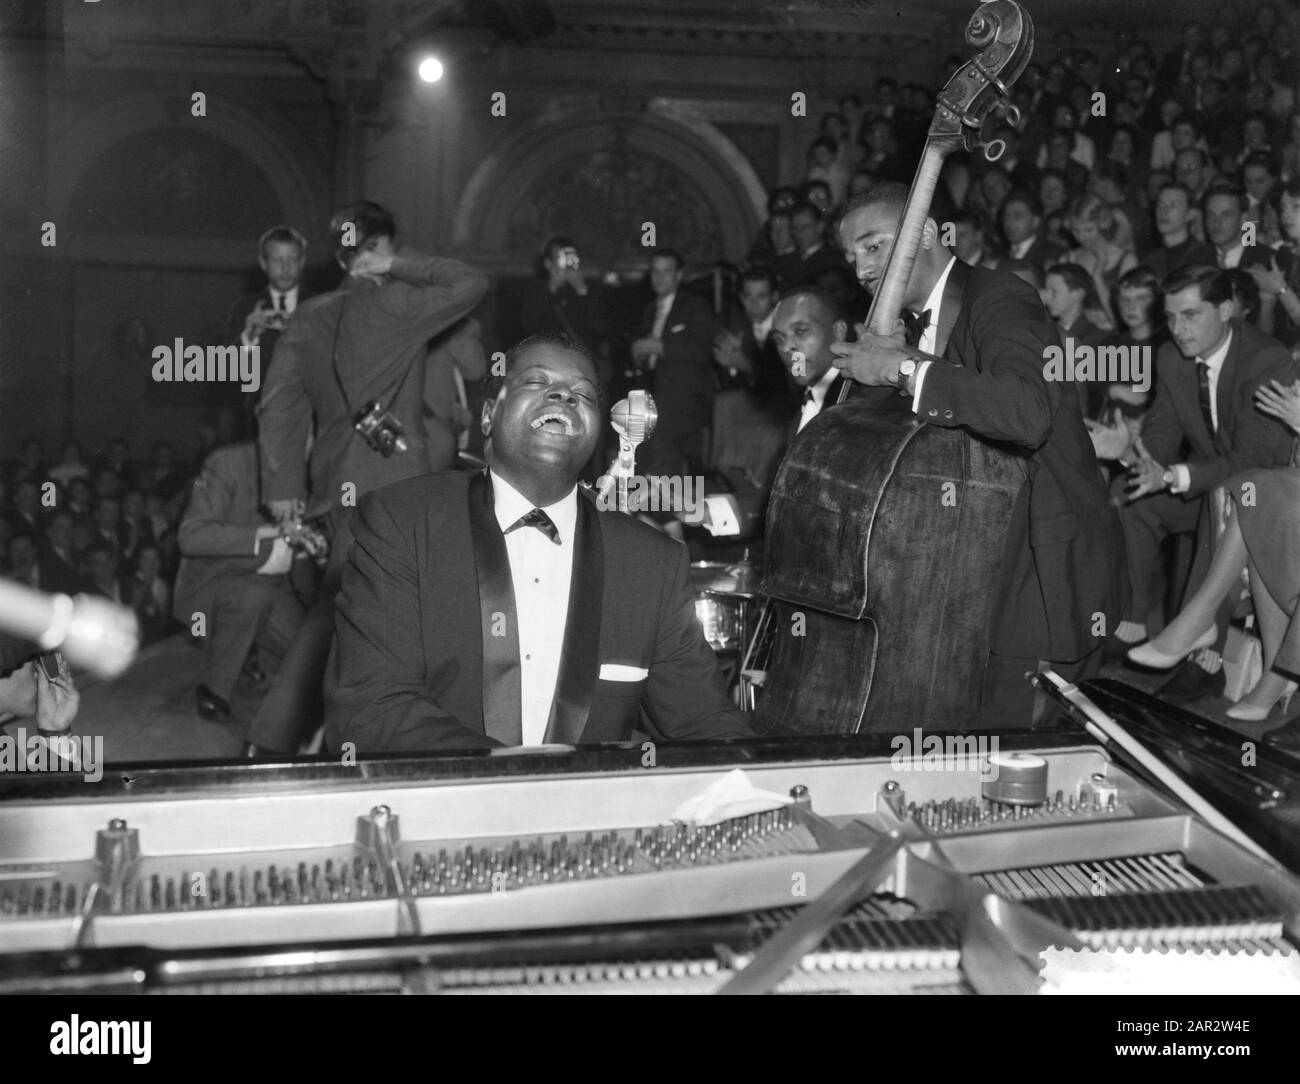 In the series Jjazz at the Philharmonica in the Concertgebouw performance of the Oscar Peterson Trio. Oscar Peterson at the piano in action. Next to him Ray Brown on bass. Behind Brown drummer Ed Thigpen Date: 11 april 1959 Location: Amsterdam, Noord-Holland Keywords: concerts, jazz, music Personal name: Brown Ray, Peterson, Oscar, Thigpen Ed Institutionname: Concertgebouw Stock Photo